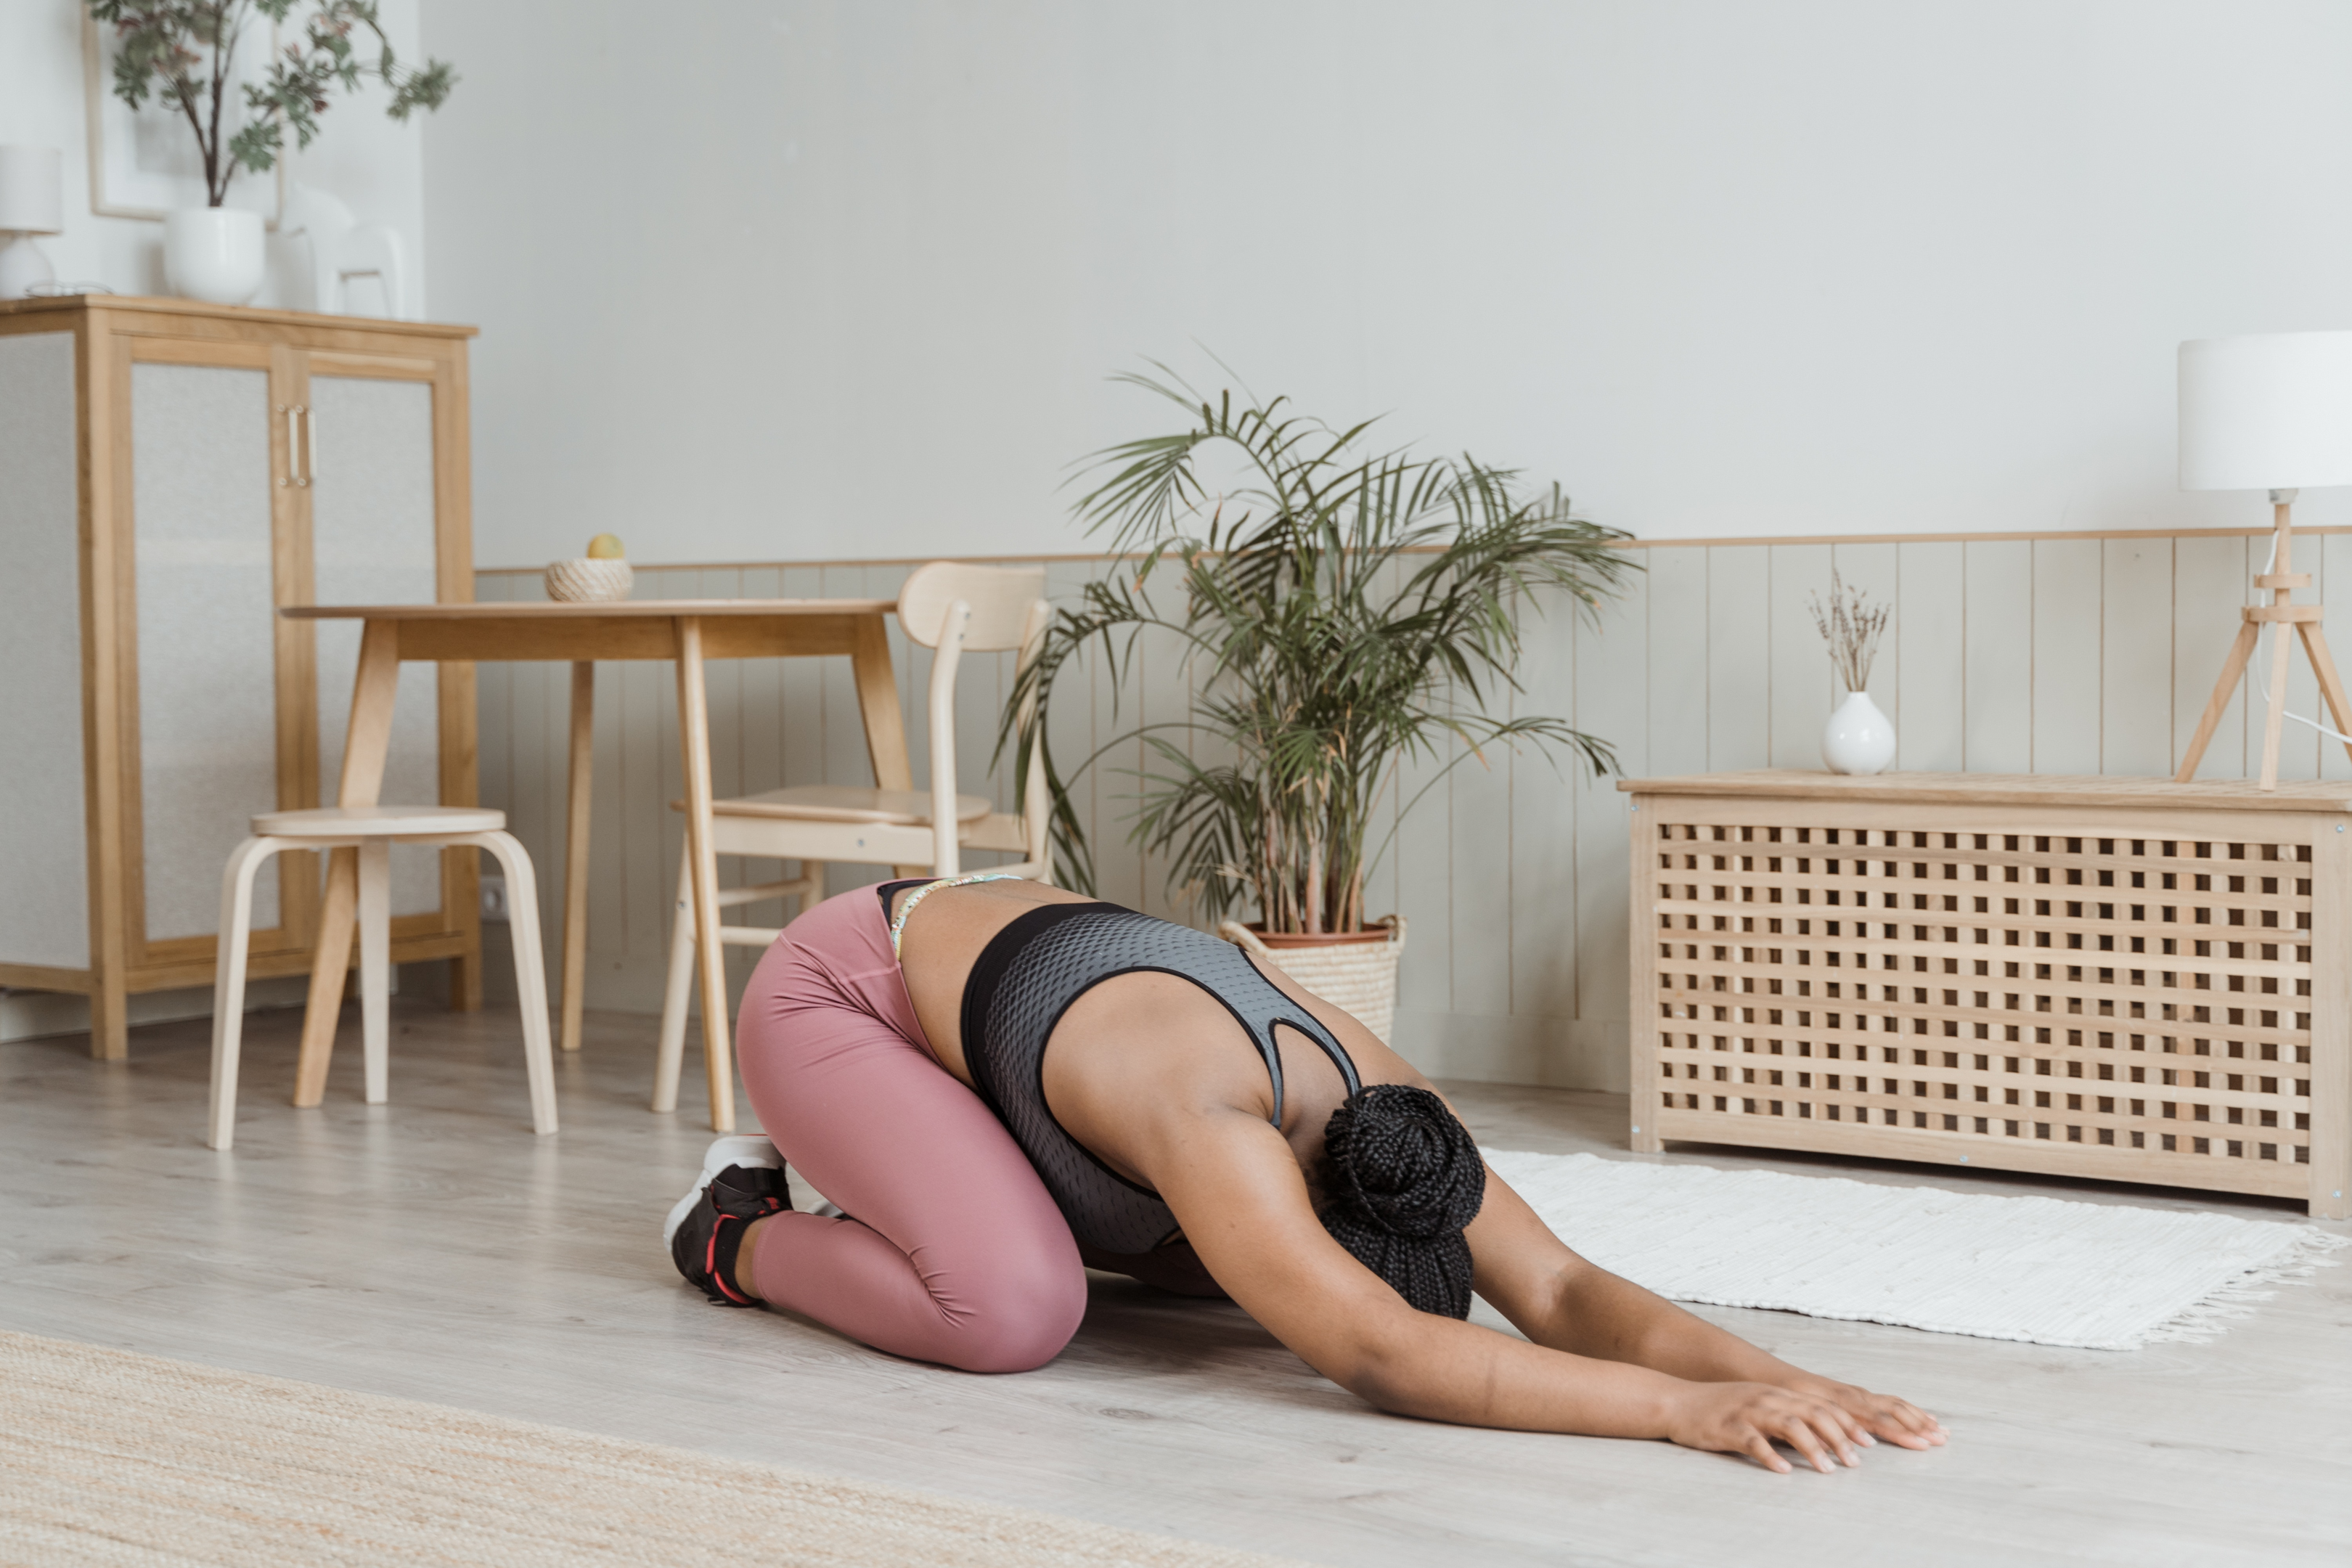 Lady stretching on floor in her home 